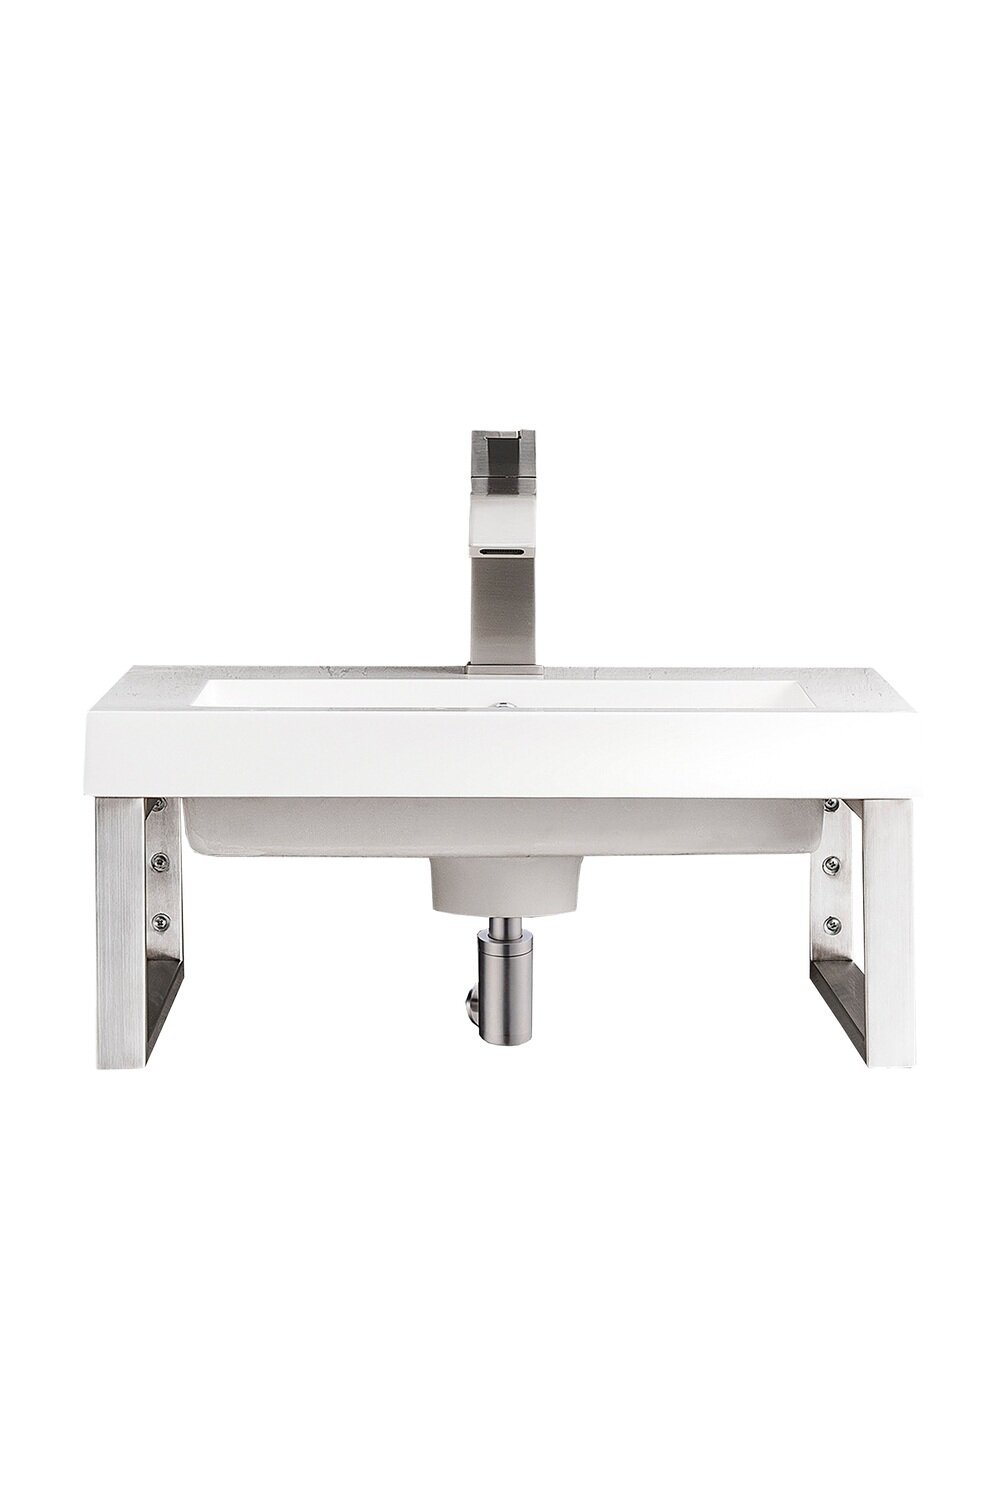 JAMES MARTIN - Two Boston 15.25&quot; Wall Brackets, Brushed Nickel w/ 20&quot; White Glossy Composite Stone Top 055BK16BNK20WG2